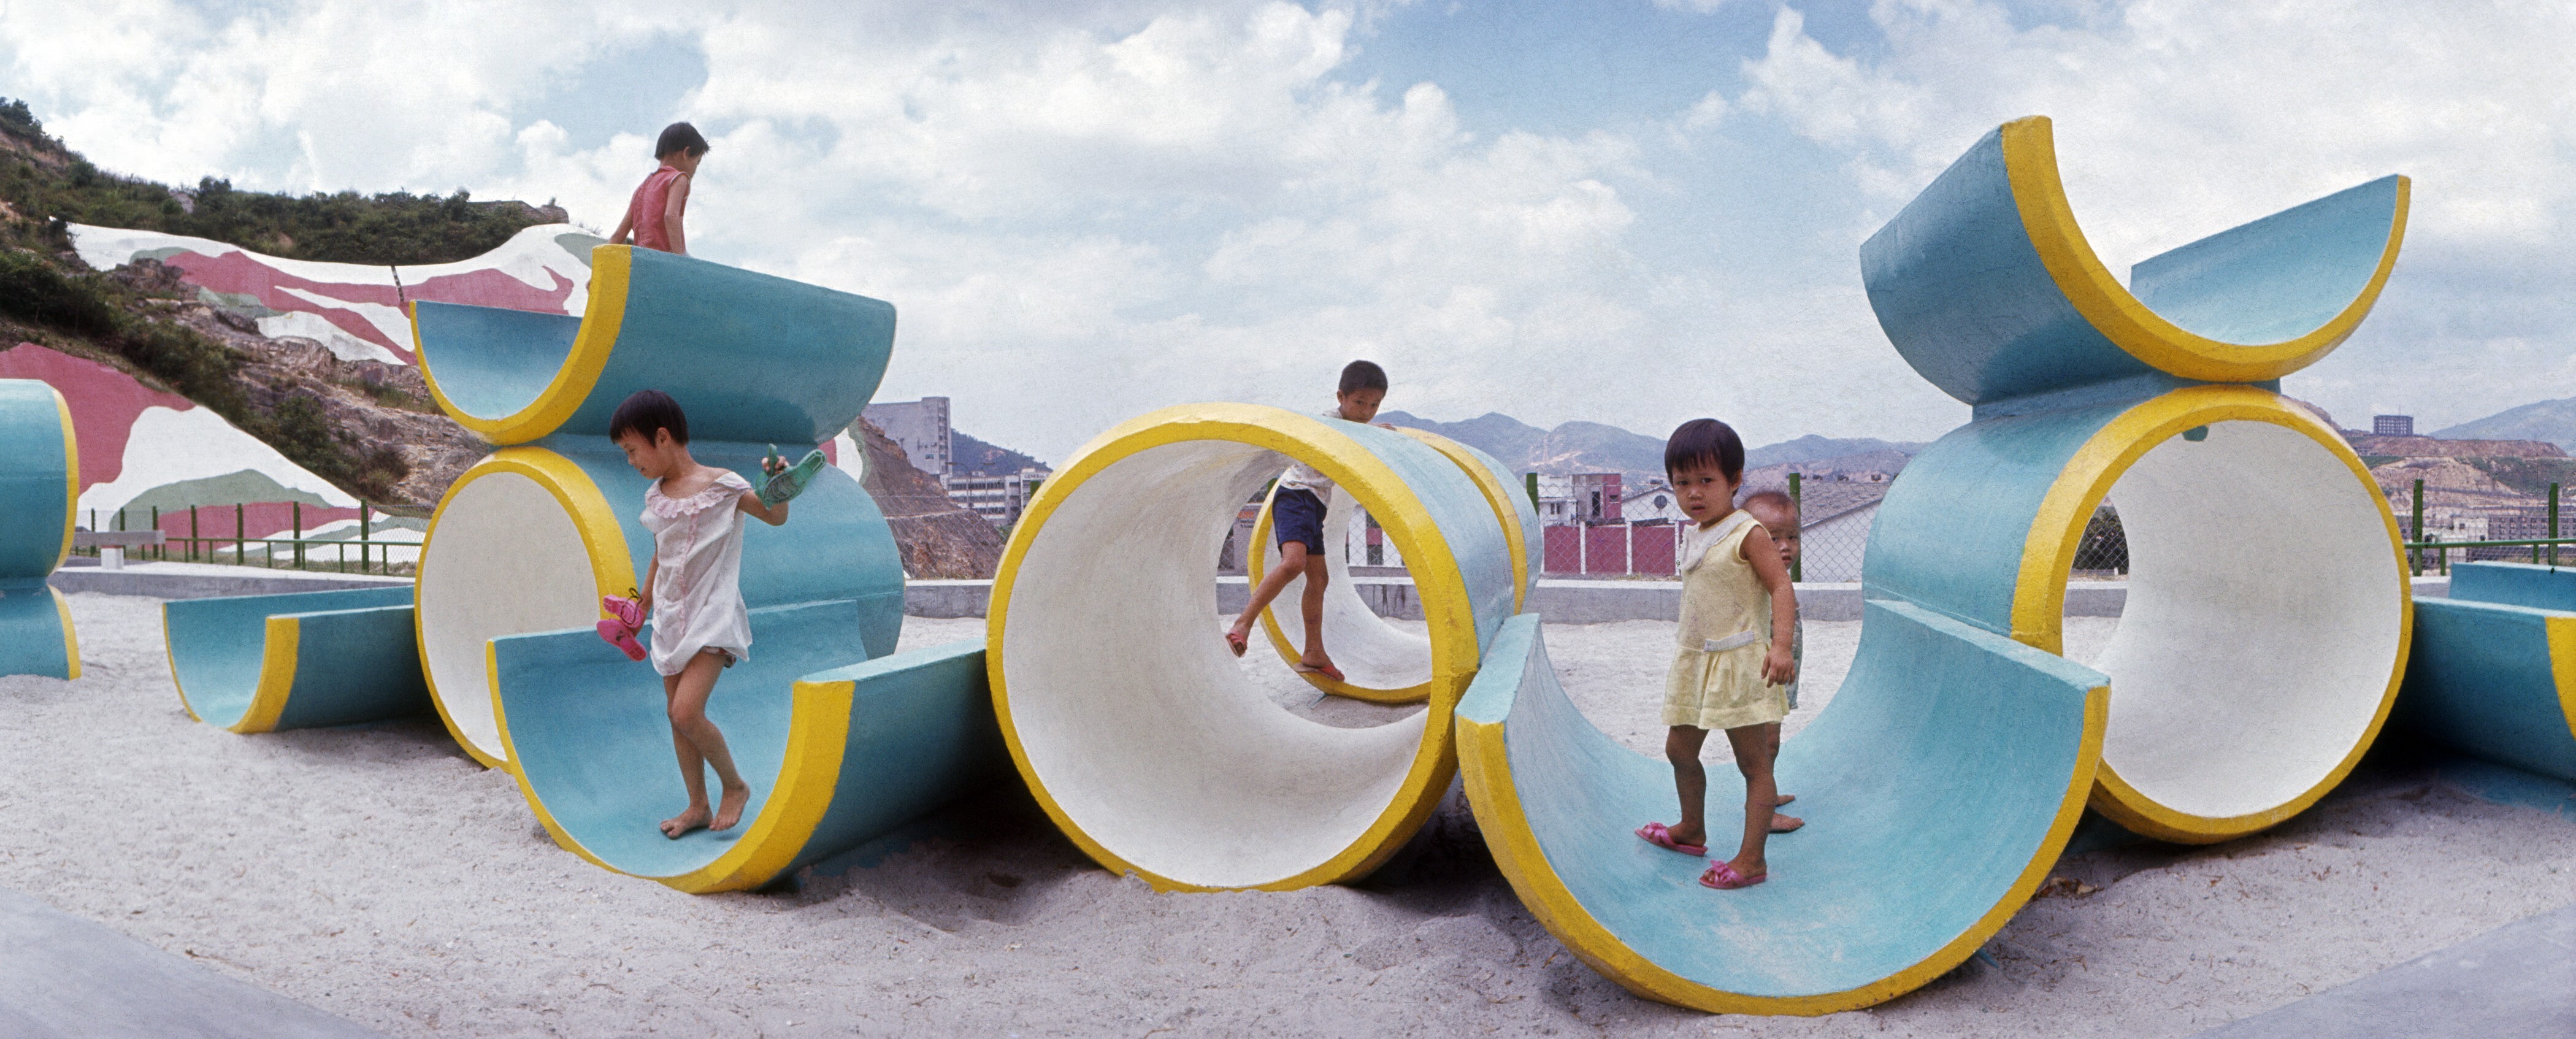 Shek Lei Playground in Kwai Chung in 1970, designed by American artist Paul Selinger. Photo: Information Services Department.